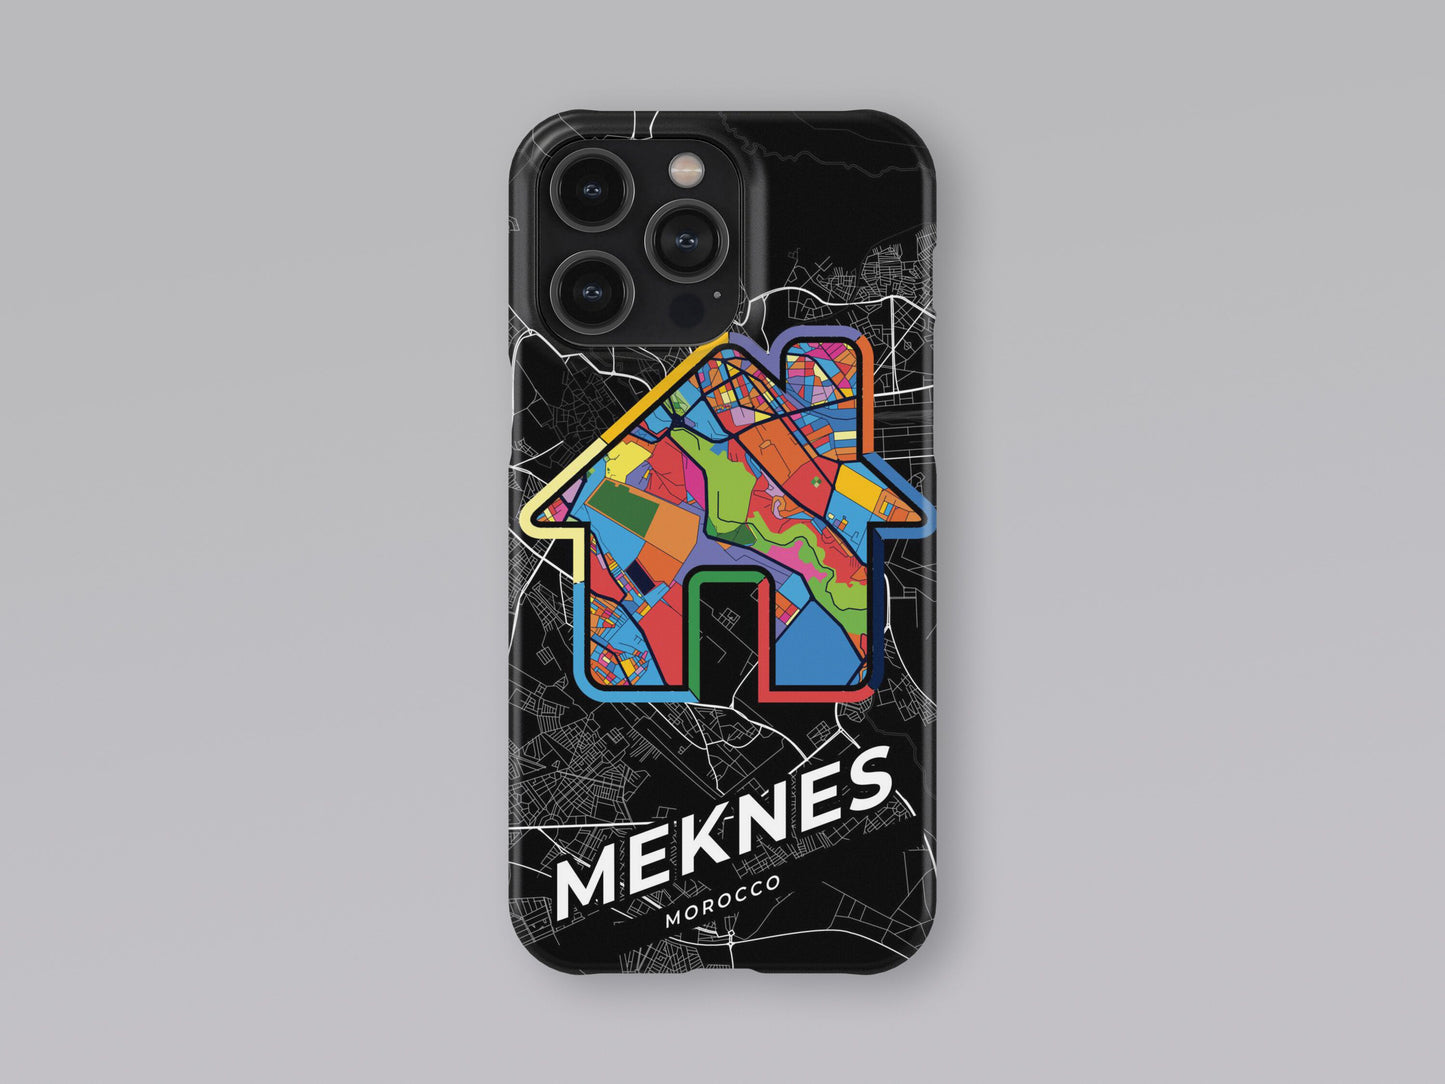 Meknes Morocco slim phone case with colorful icon 3